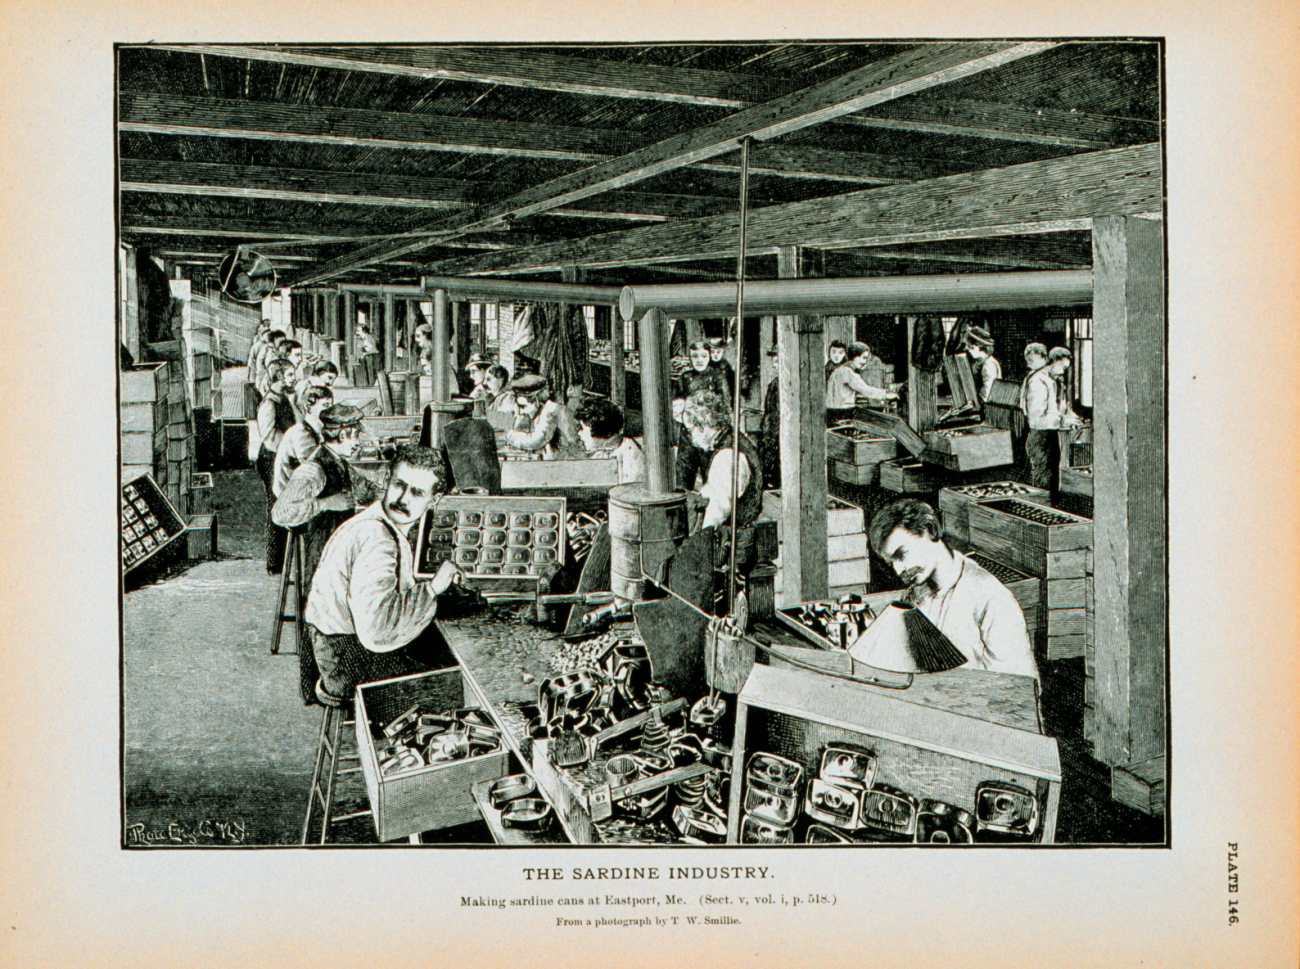 Making sardine cans at Eastport, MaineFrom a photograph by T